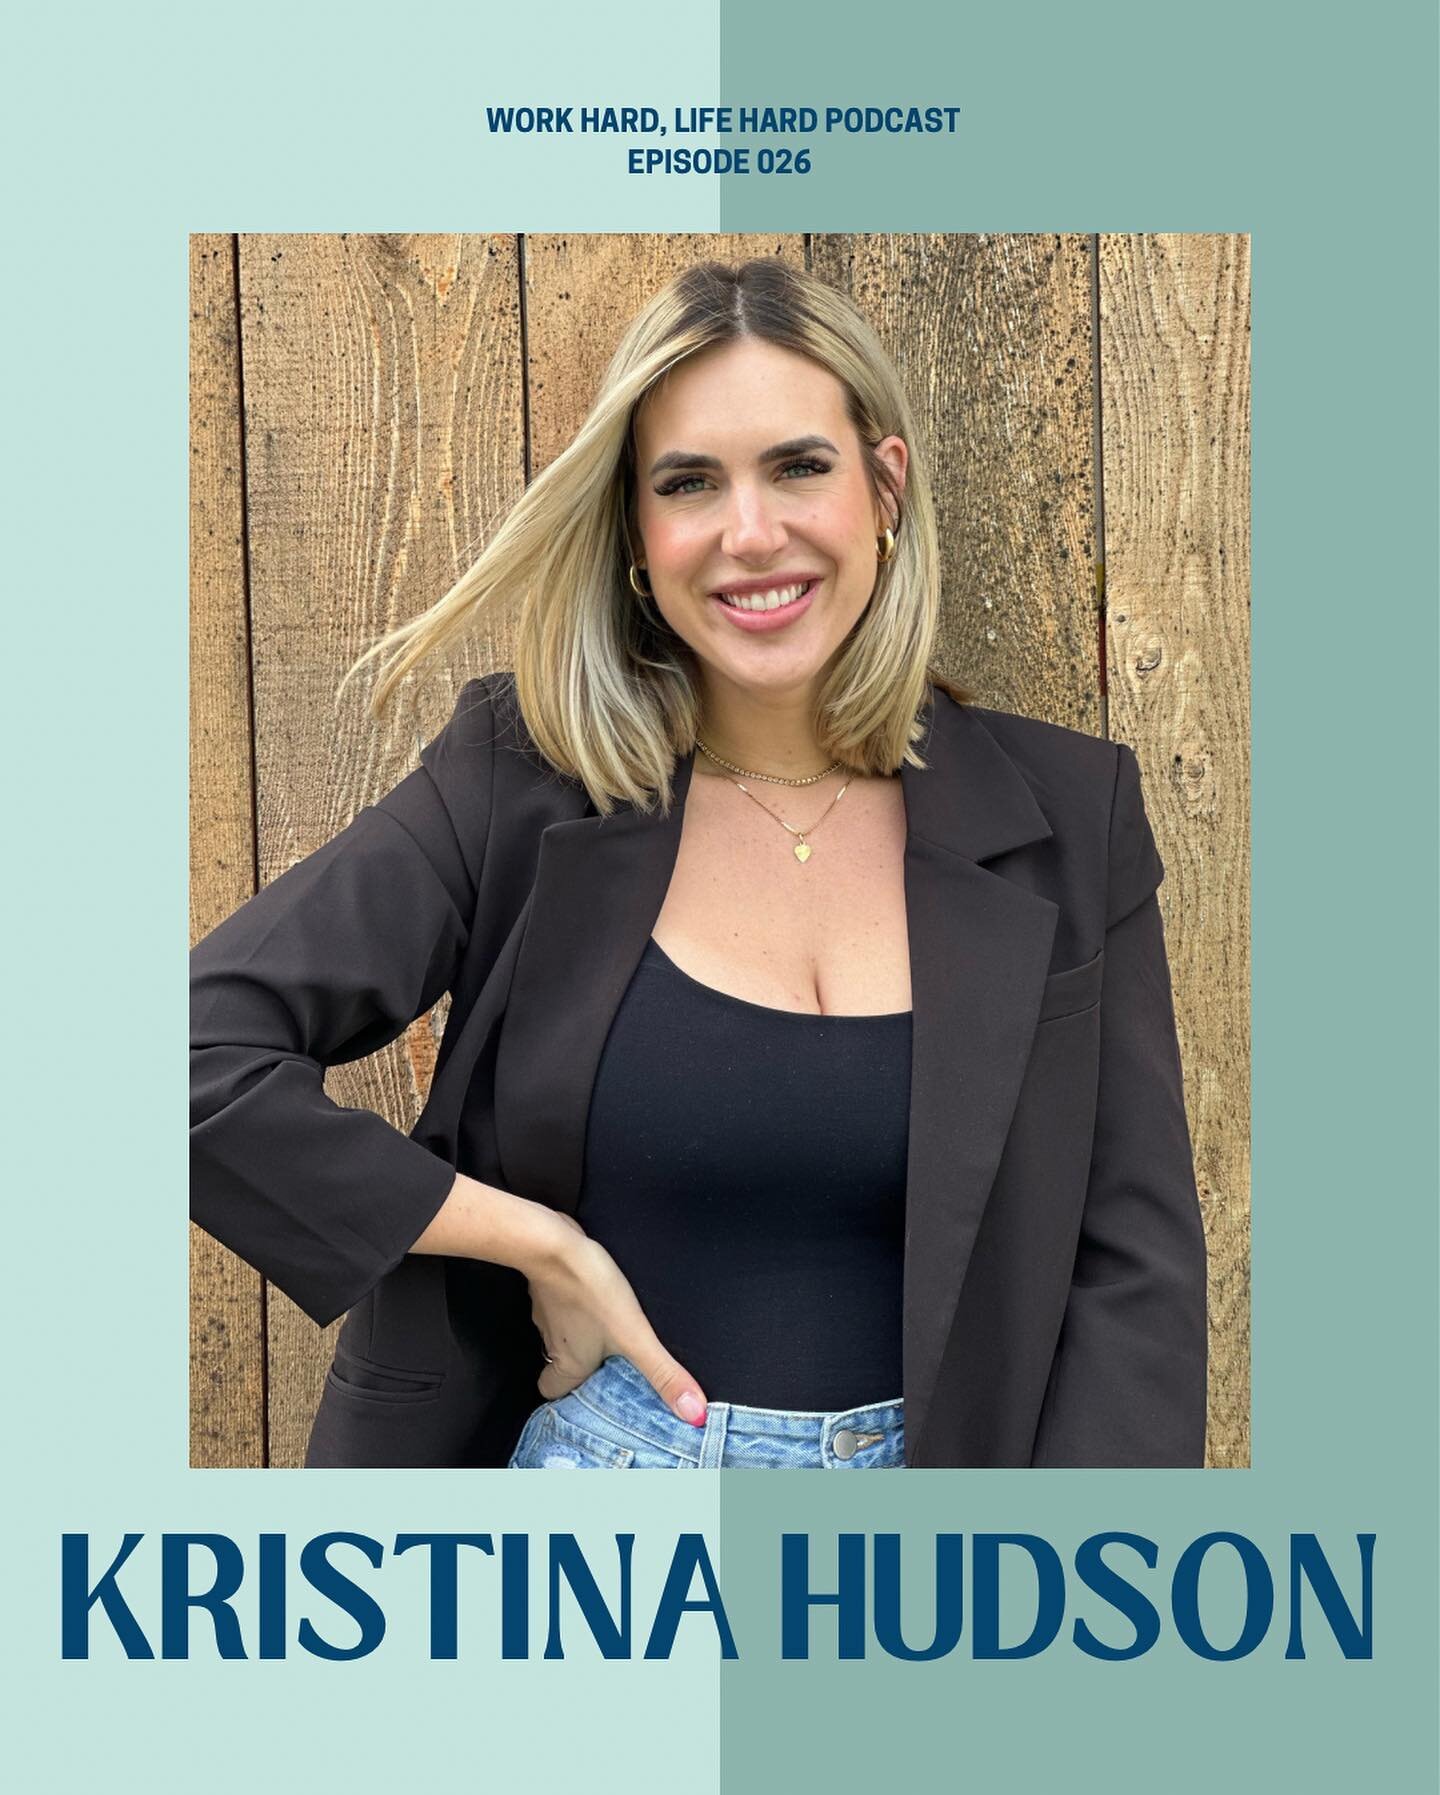 ✨TOMORROW ✨

@kristinahudsonn from @krushssm is HERE on the show to talk ALL THINGS work/life balance. We talk about entrepreneurship and generational entrepreneurship, becoming a wife, motherhood, and so much more.

Swipe to see the KEYS from this w